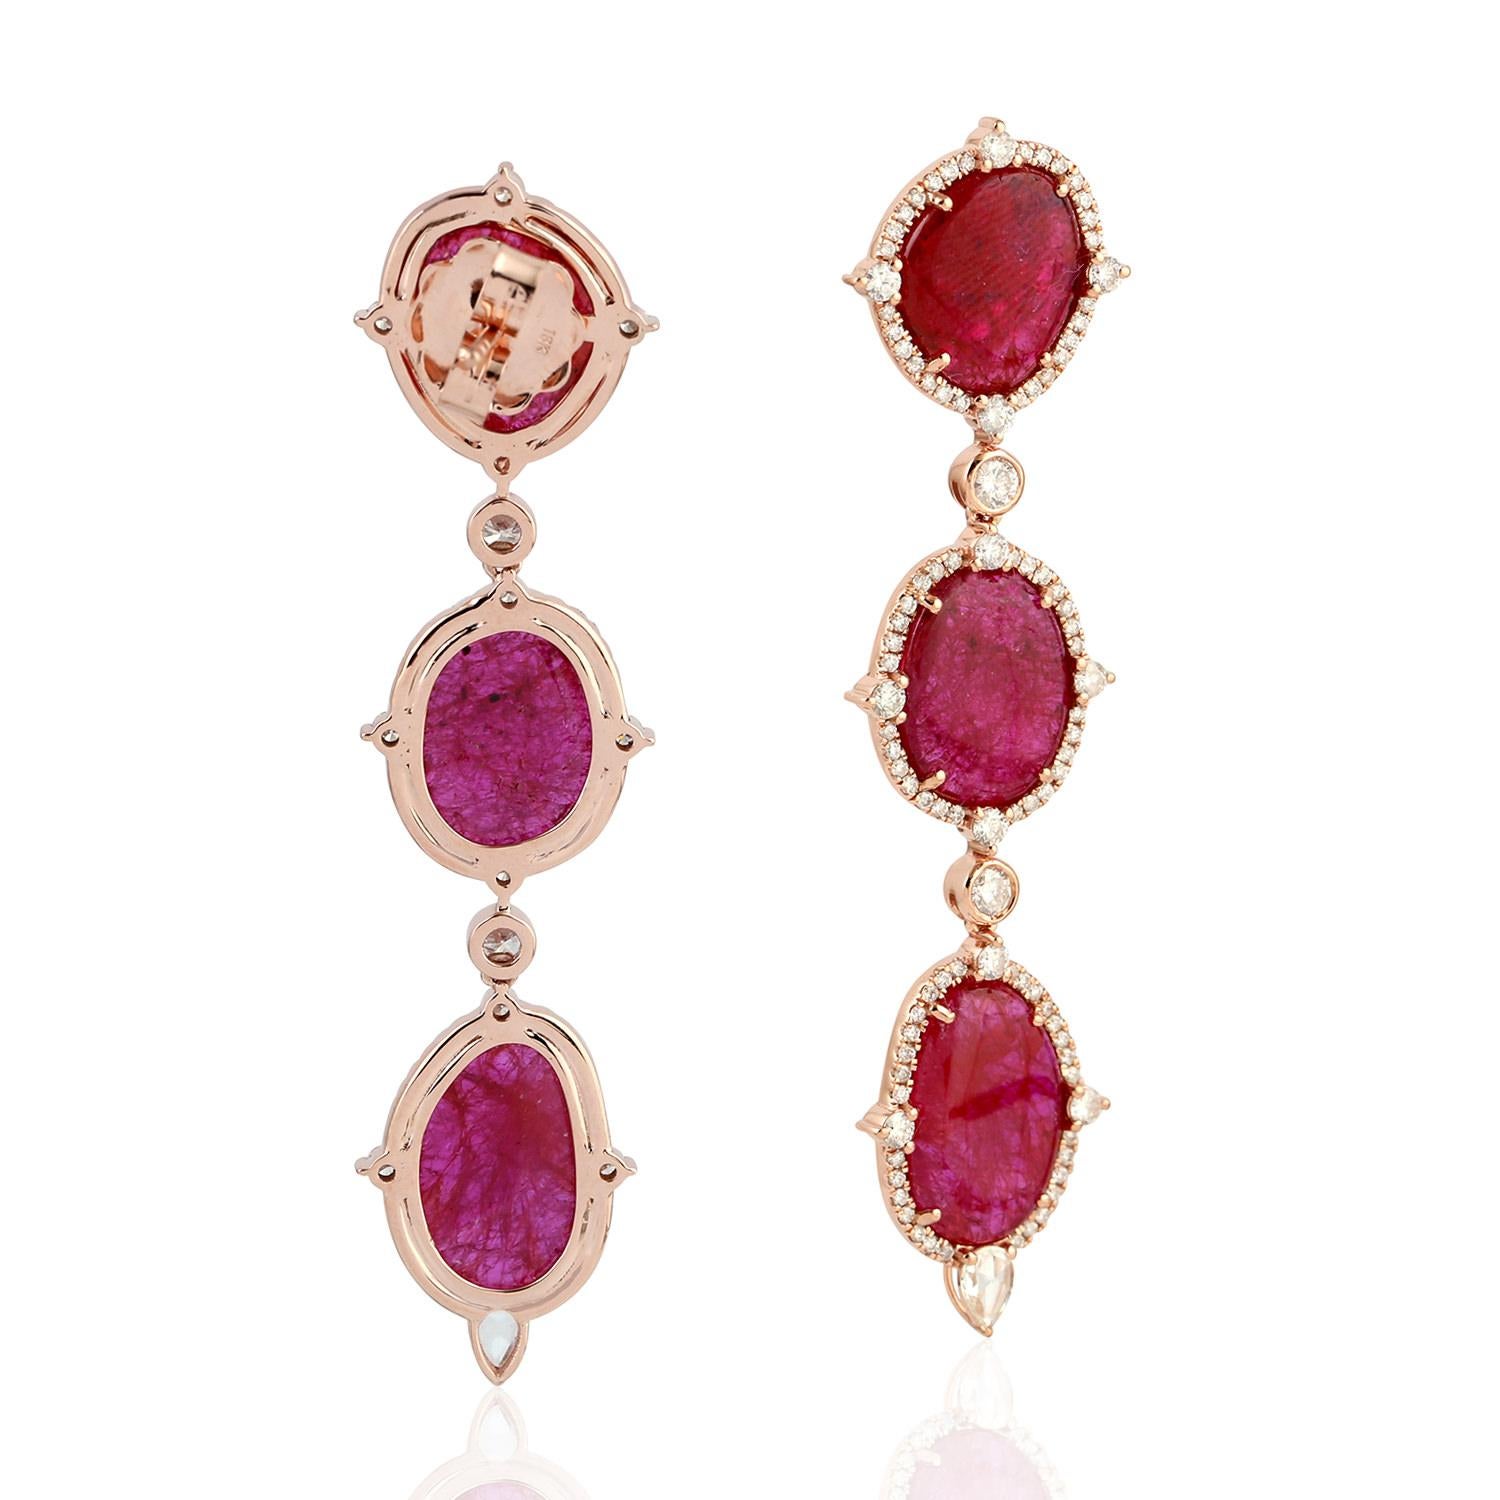 Contemporary 21.34ct 3 Tier Ruby Dangle Earrings With Diamonds Made In 18k Yellow Gold For Sale